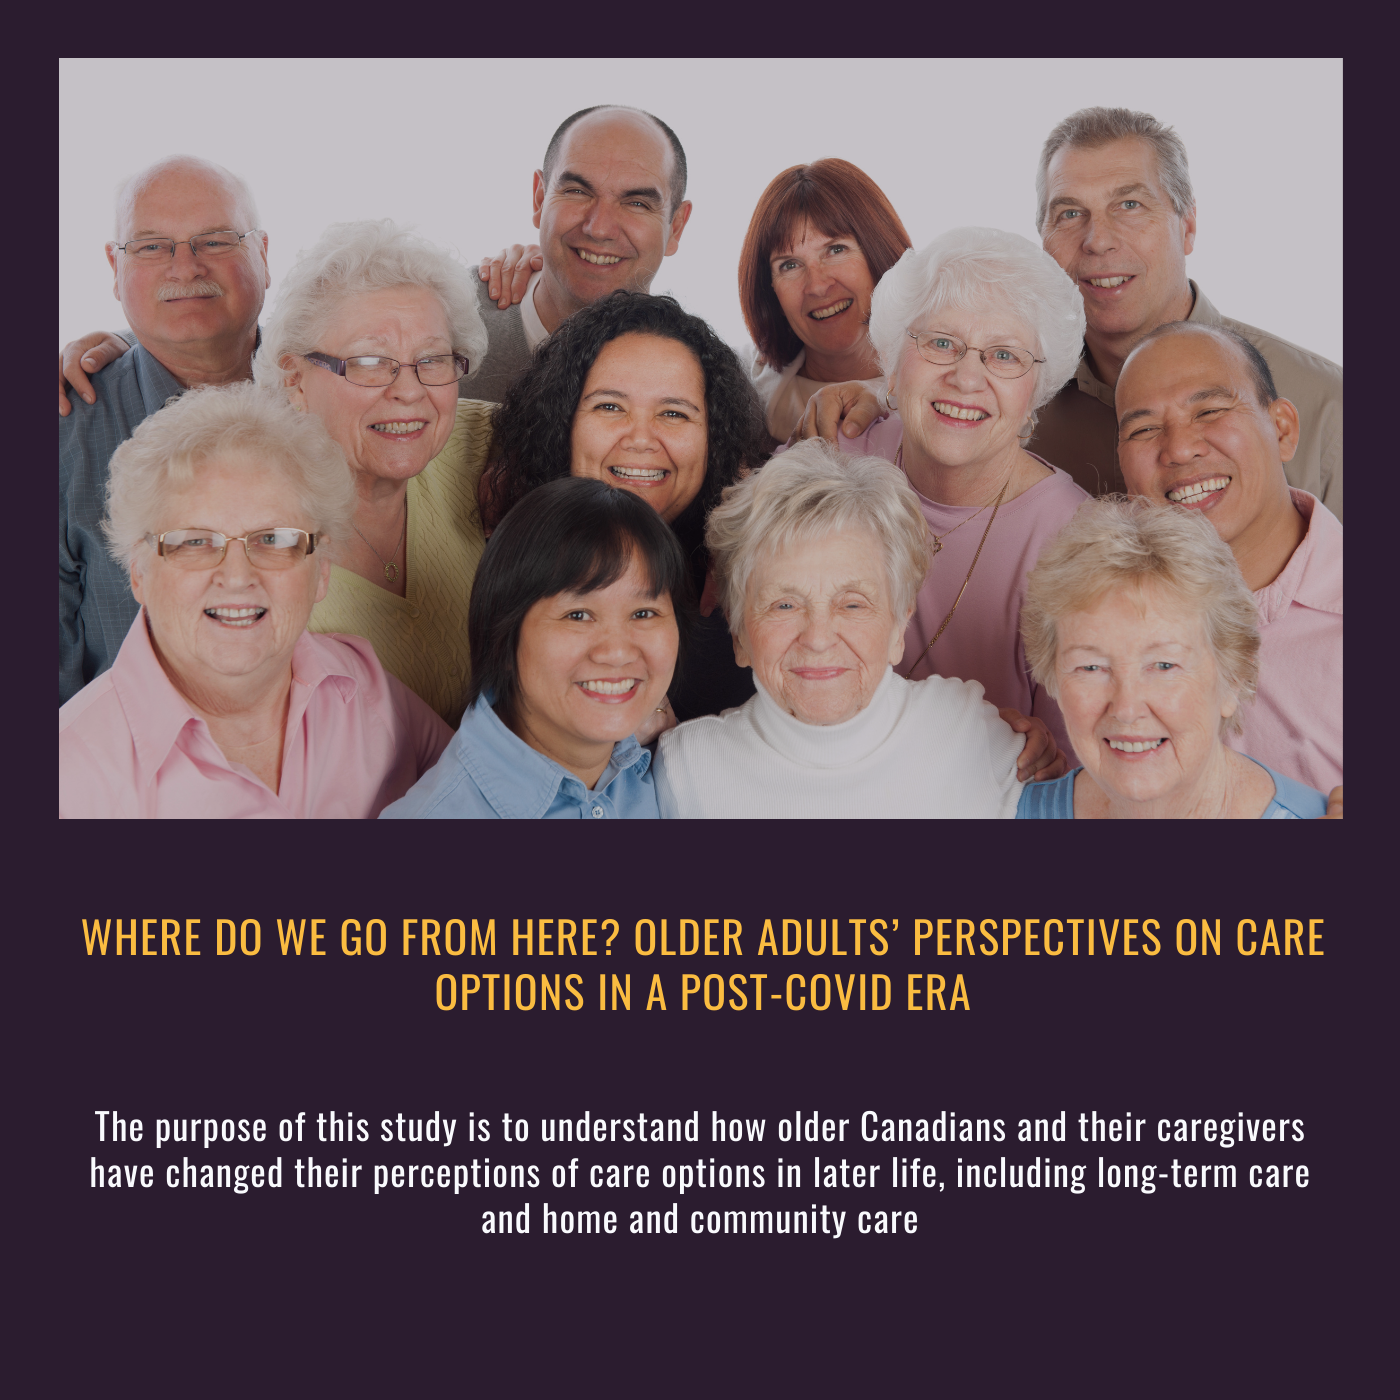 Where do we go from here? Older adults’ perspectives on care options in a post-COVID era. The purpose of this study is to understand how older Canadians and their caregivers have changed their perceptions of care options in later life, including long-term care and home and community care